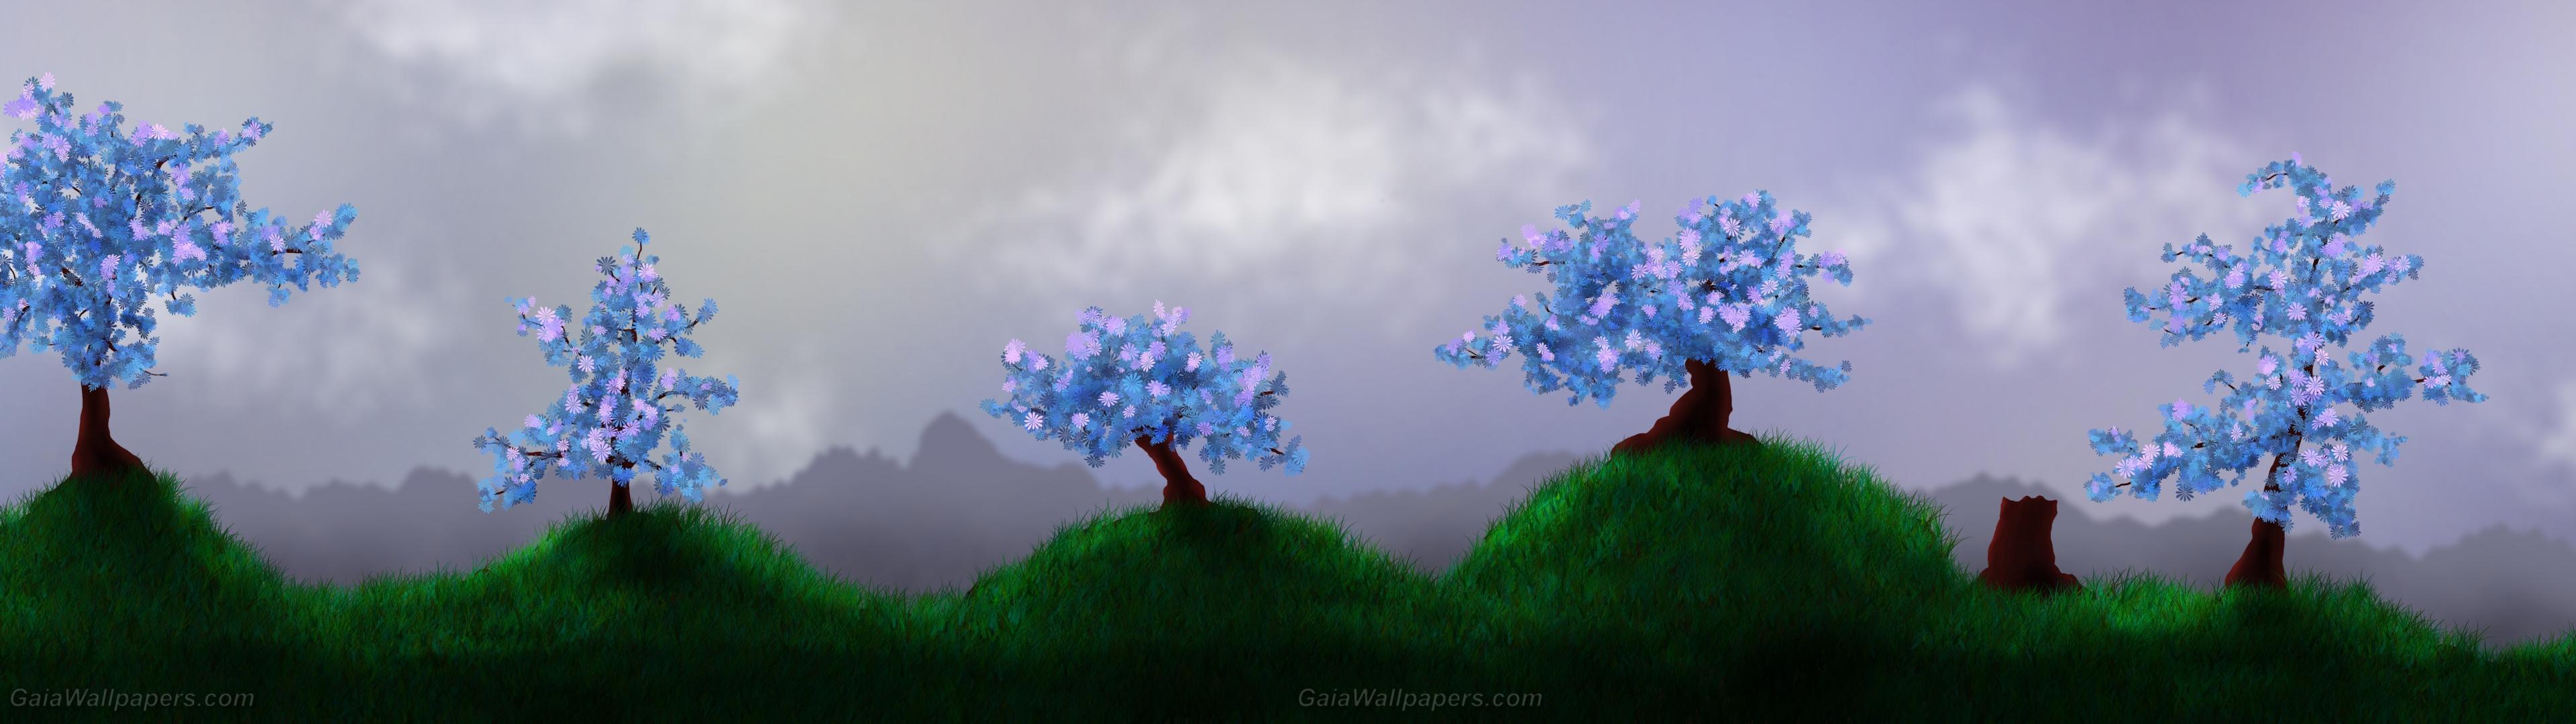 Trees In Bloom A World Of Serenity Wallpaper